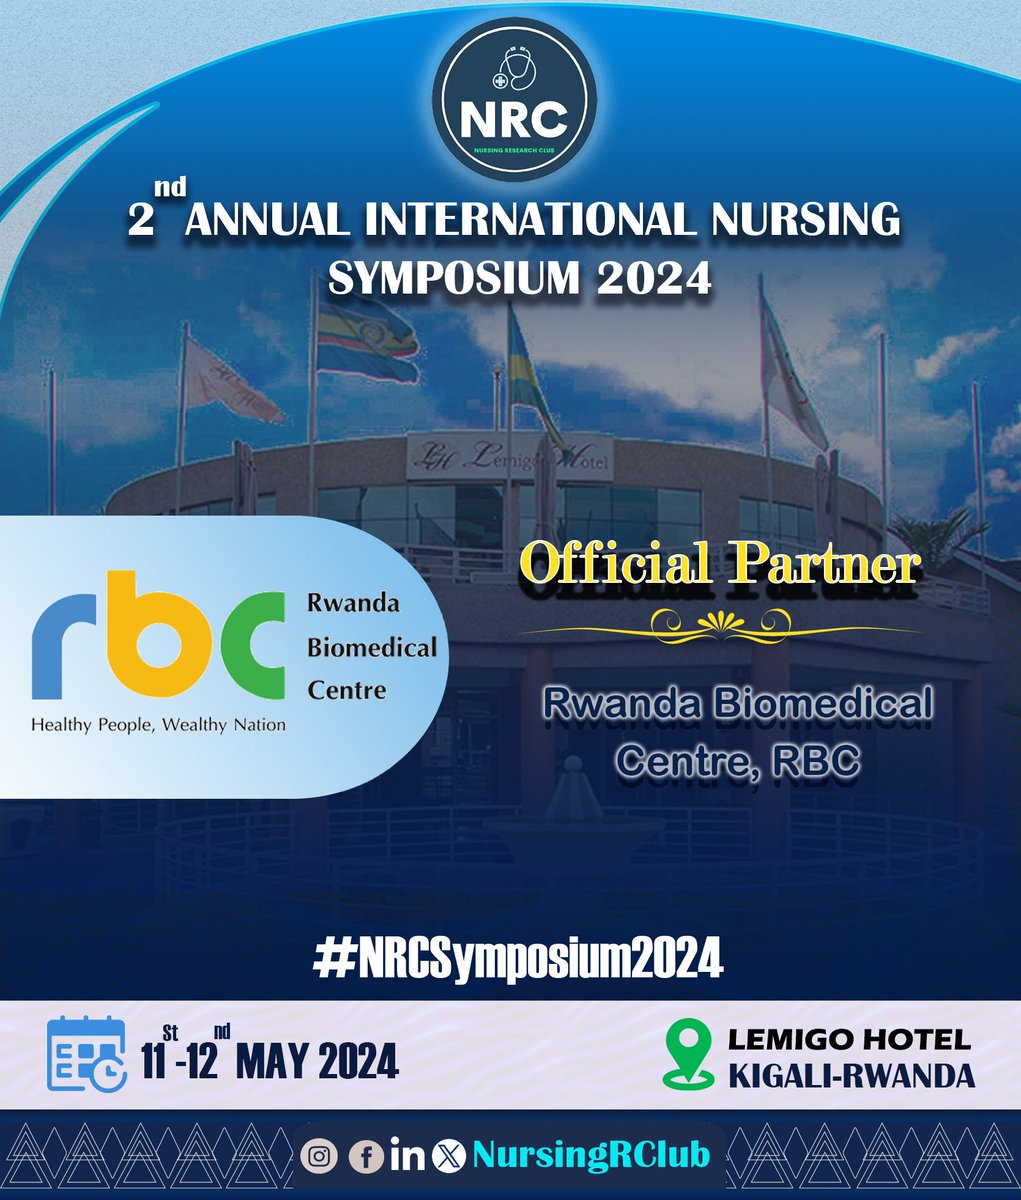 🚨📢 #NewStrongPartnership We're excited to announce @RBCRwanda as an official partner of #2ndAnnualInternationalNursingSymposium2024. This partnership will greatly improve health standards through revolutionized health research. #NRCSymposium2024 #YouthInResearch @CMuvunyi